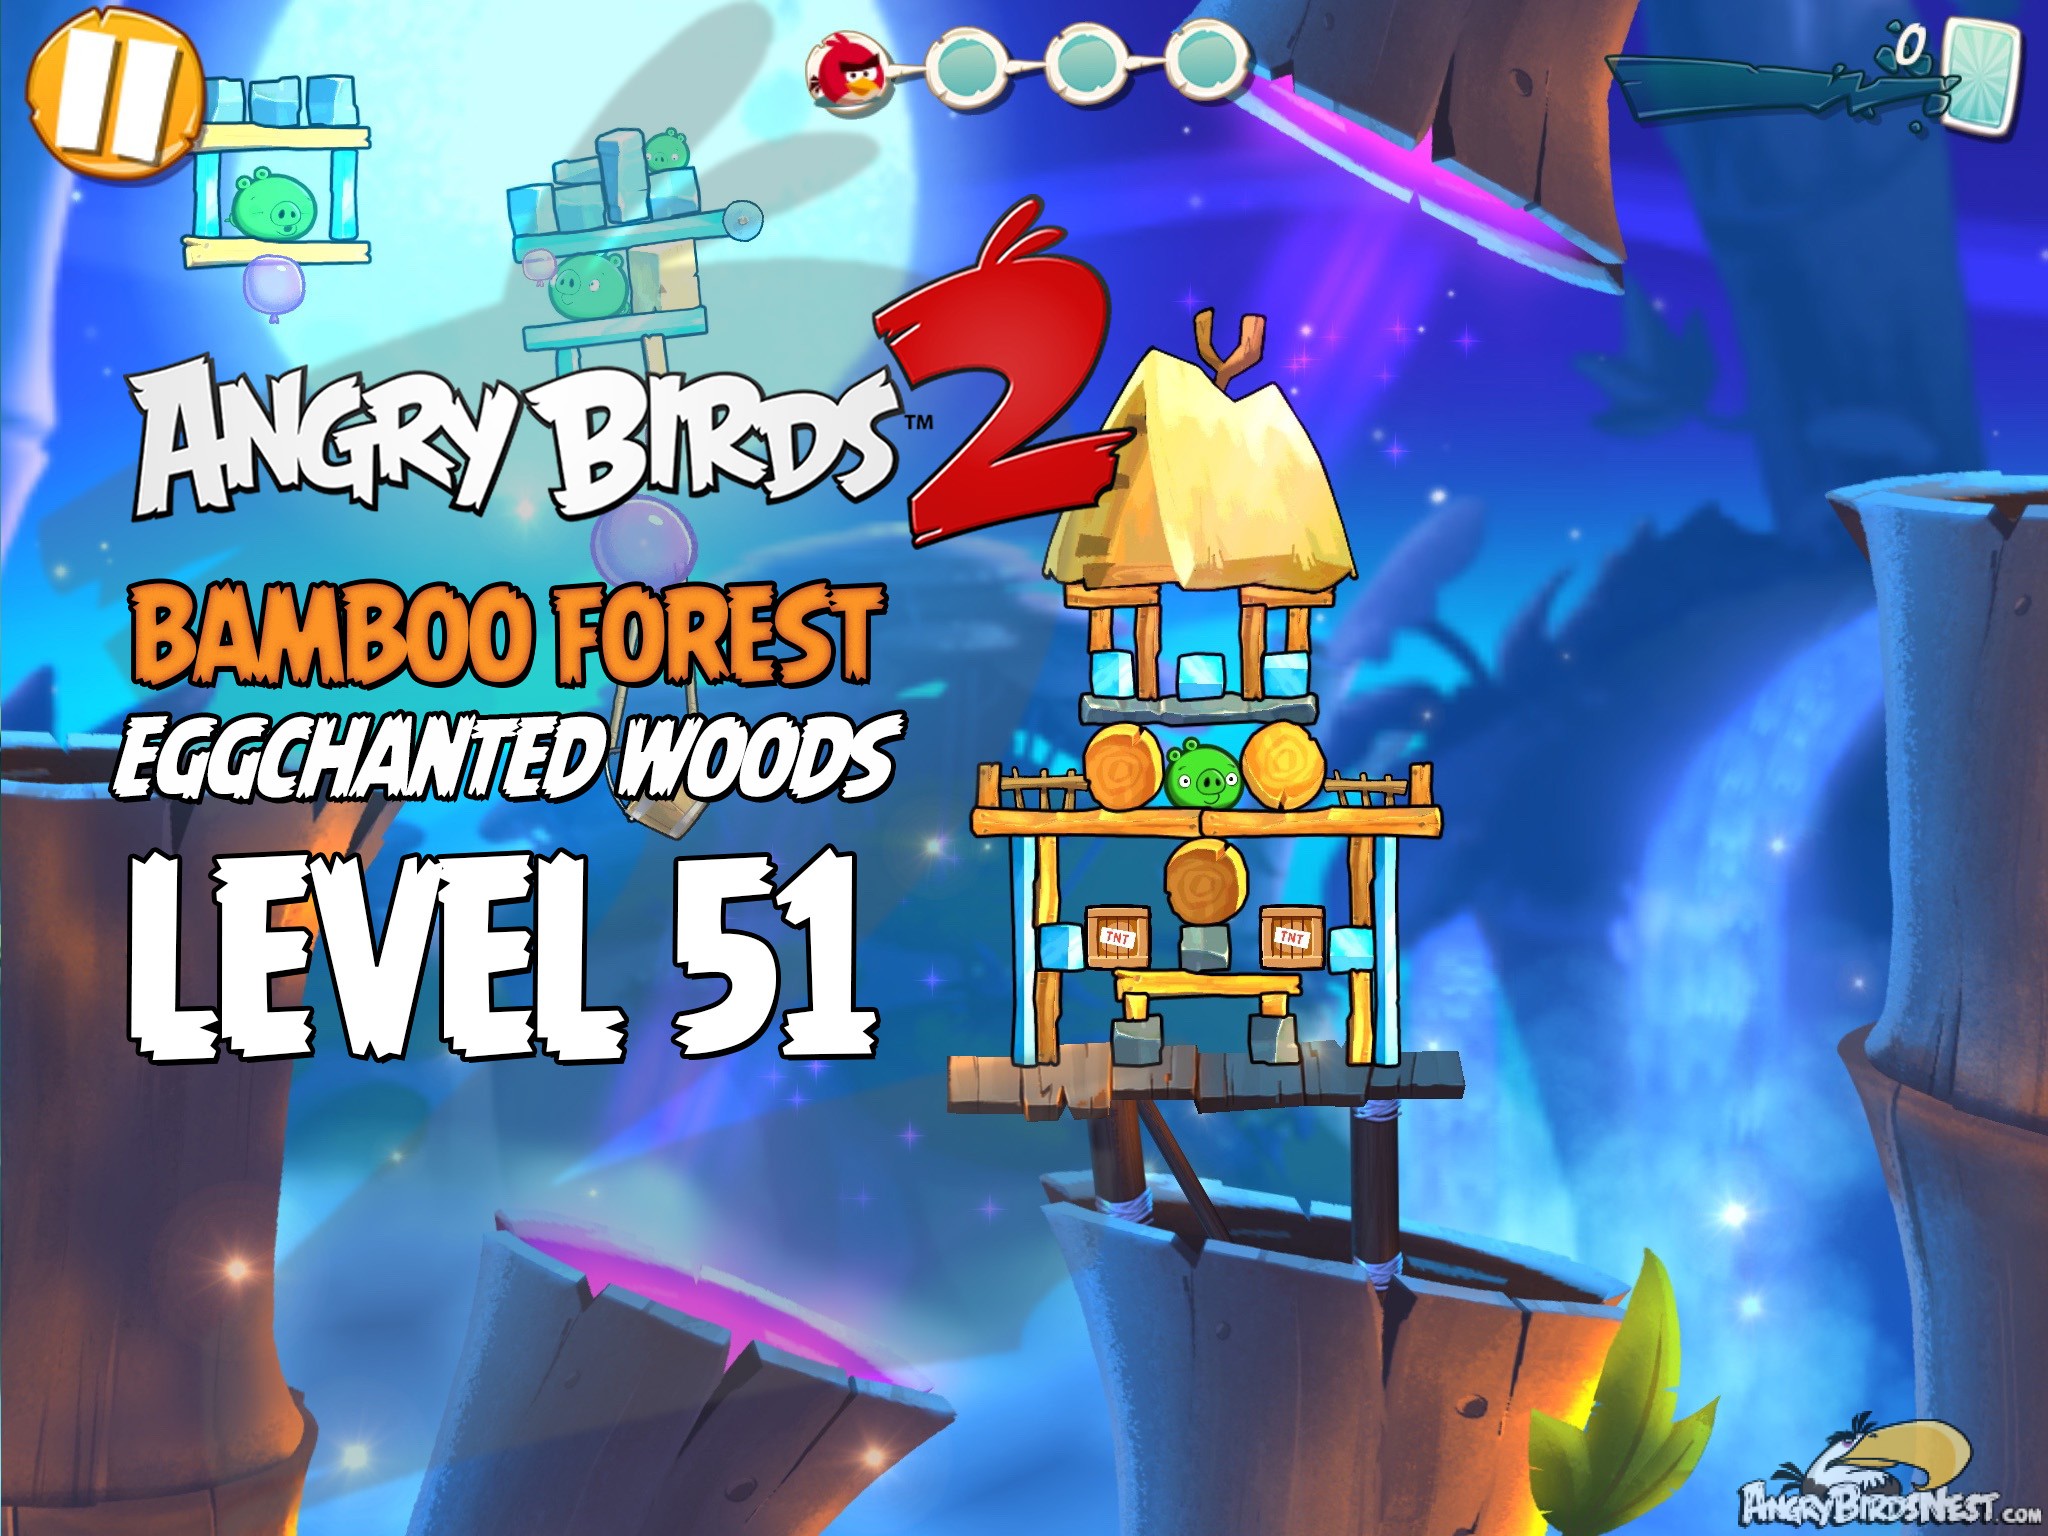 Angry Birds 2 Bamboo Forest Eggchanted Woods Level 51